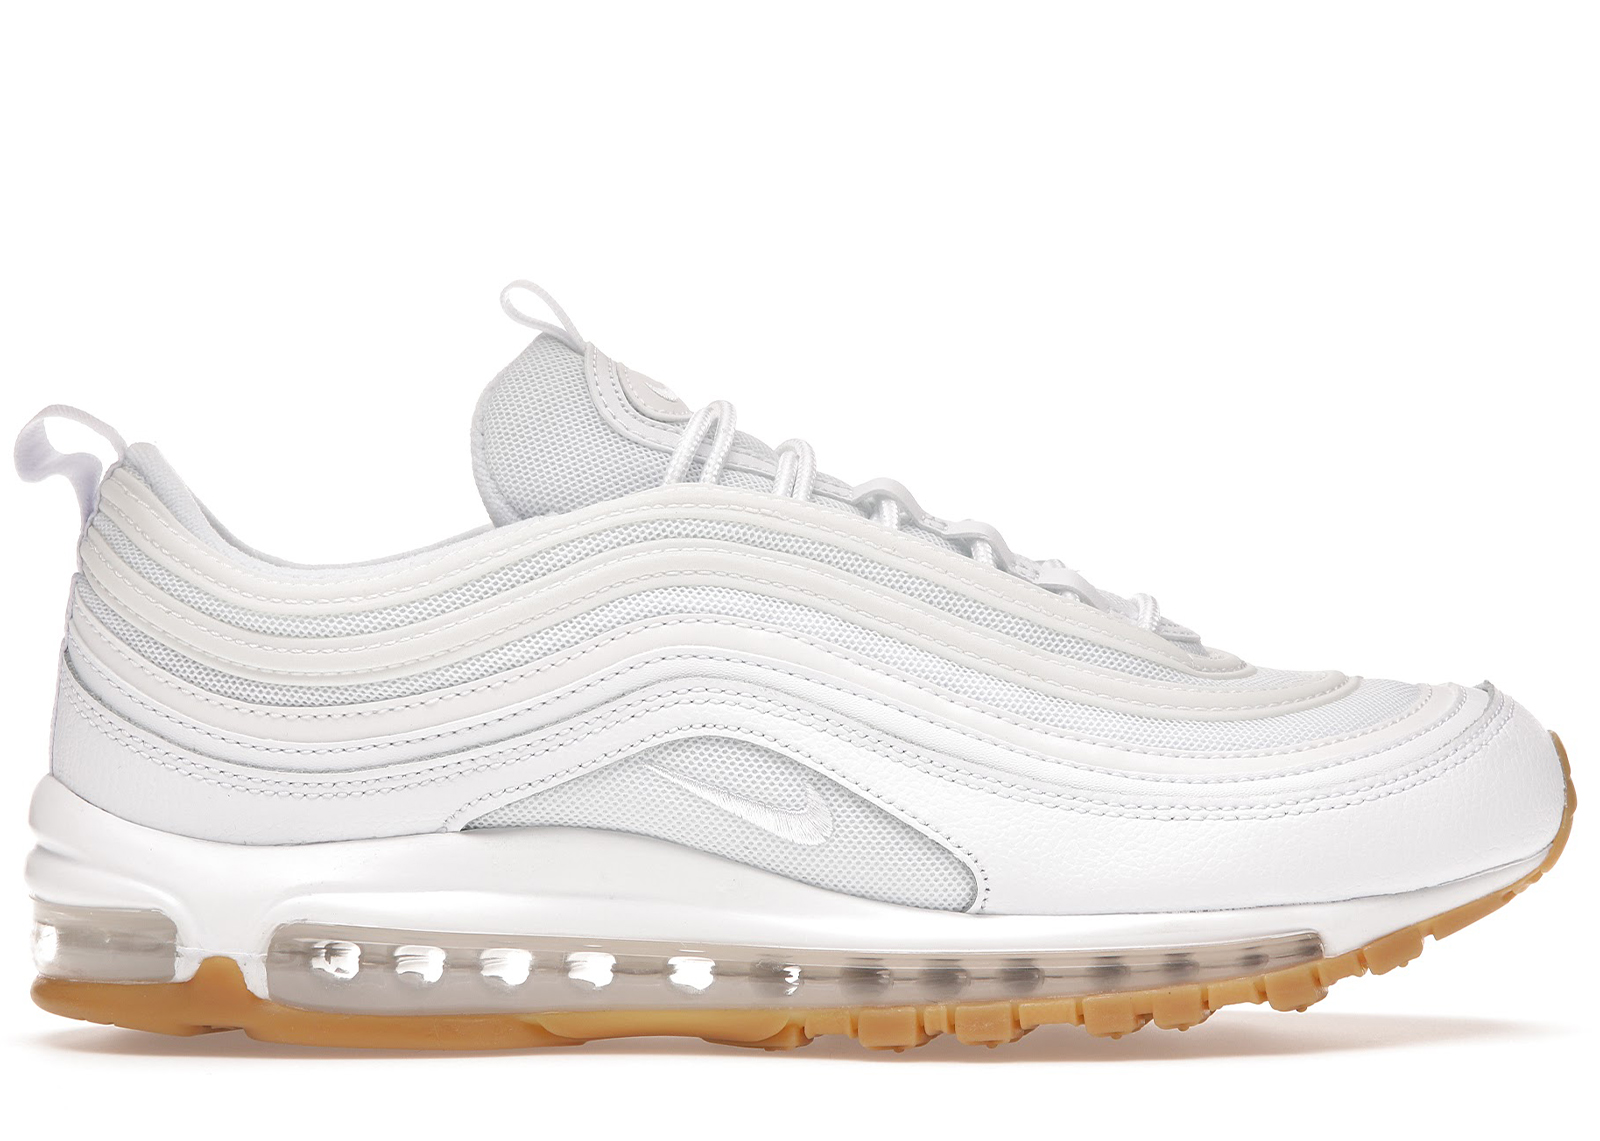 Buy Nike Air Max 97 Size 15 Shoes & Deadstock Sneakers ايس كريم مثلج